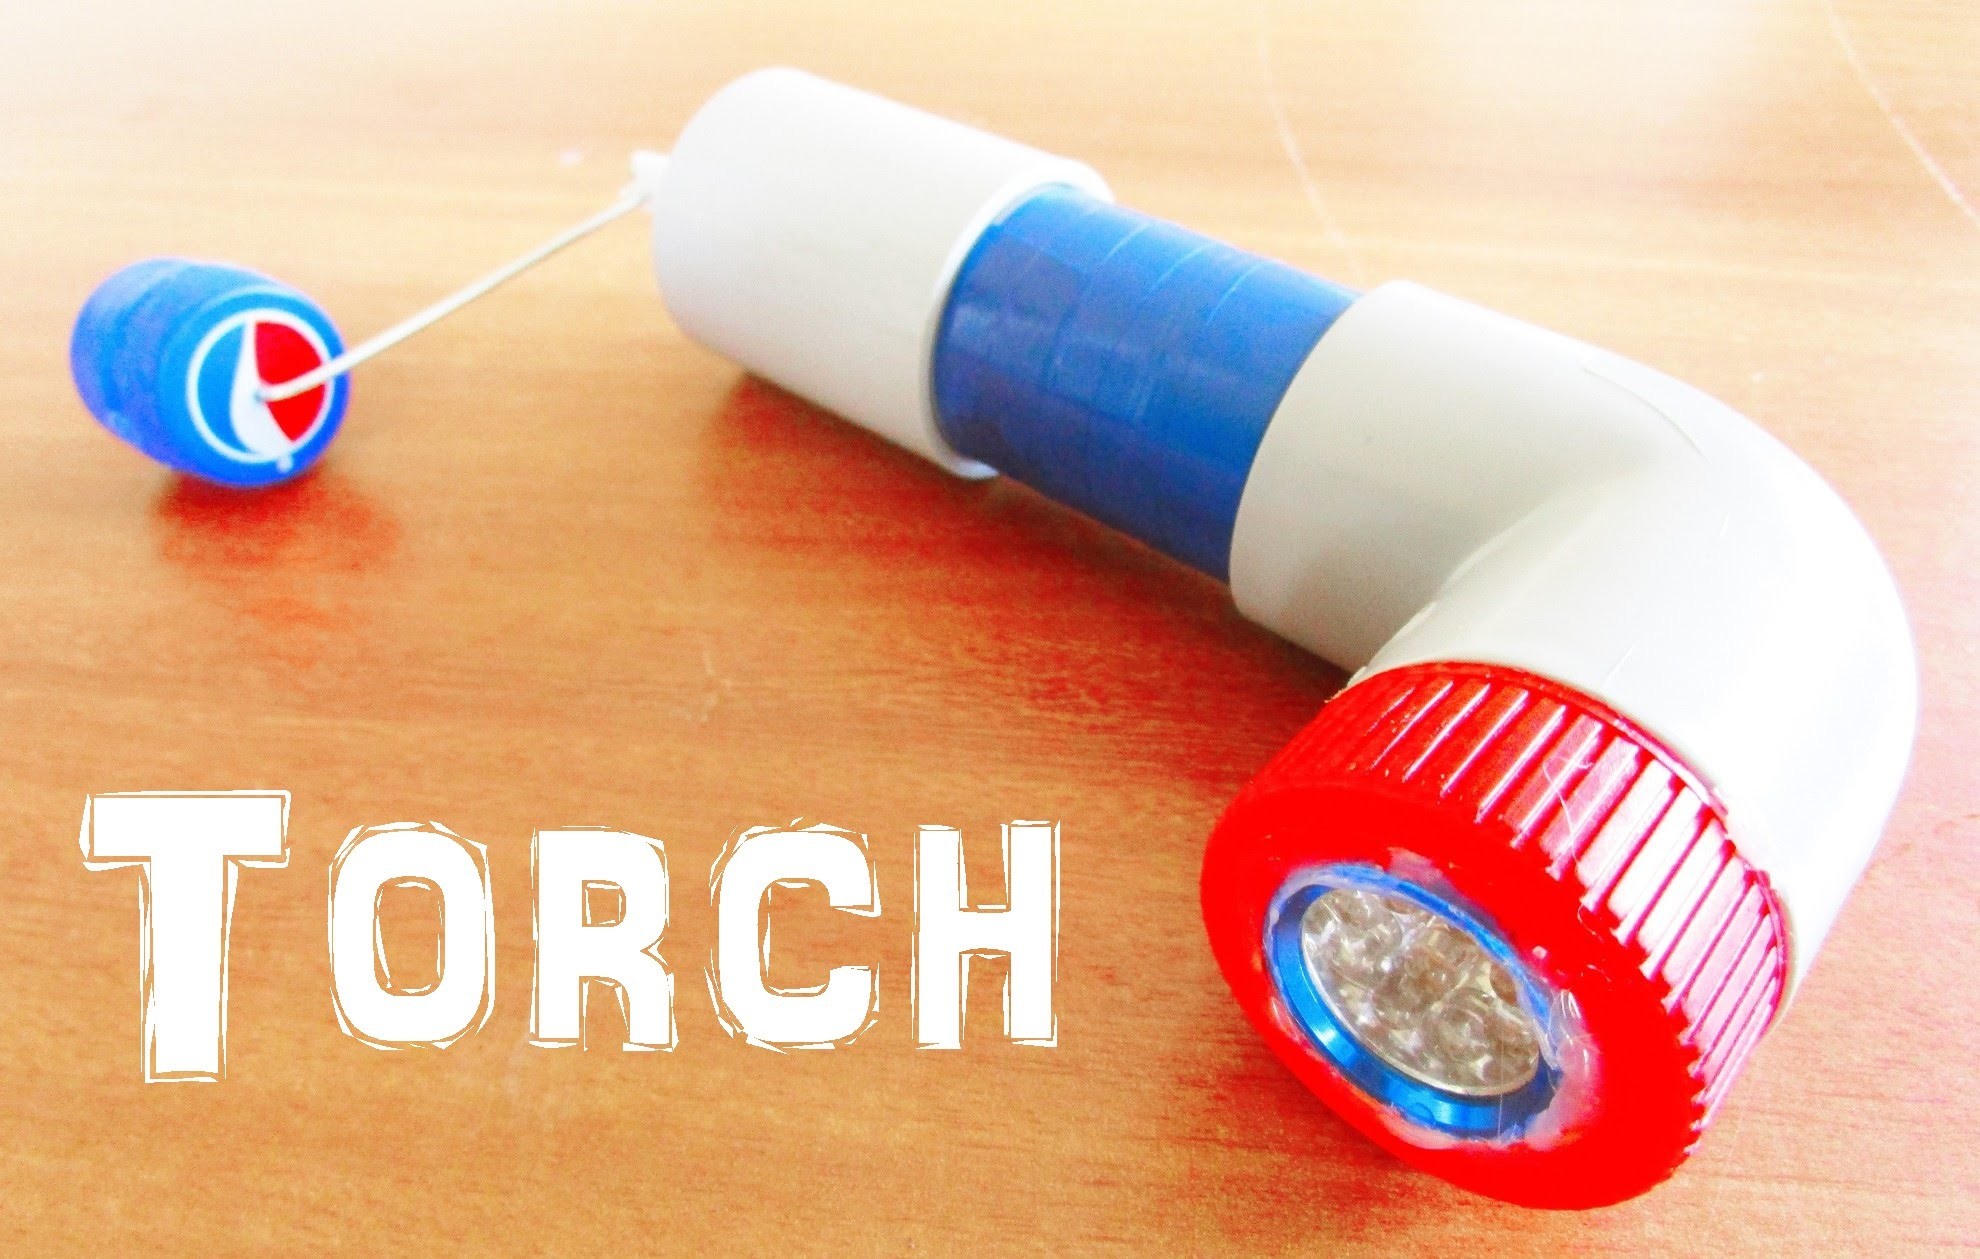 How to Make a Flashlight.Torch - using DC Motor